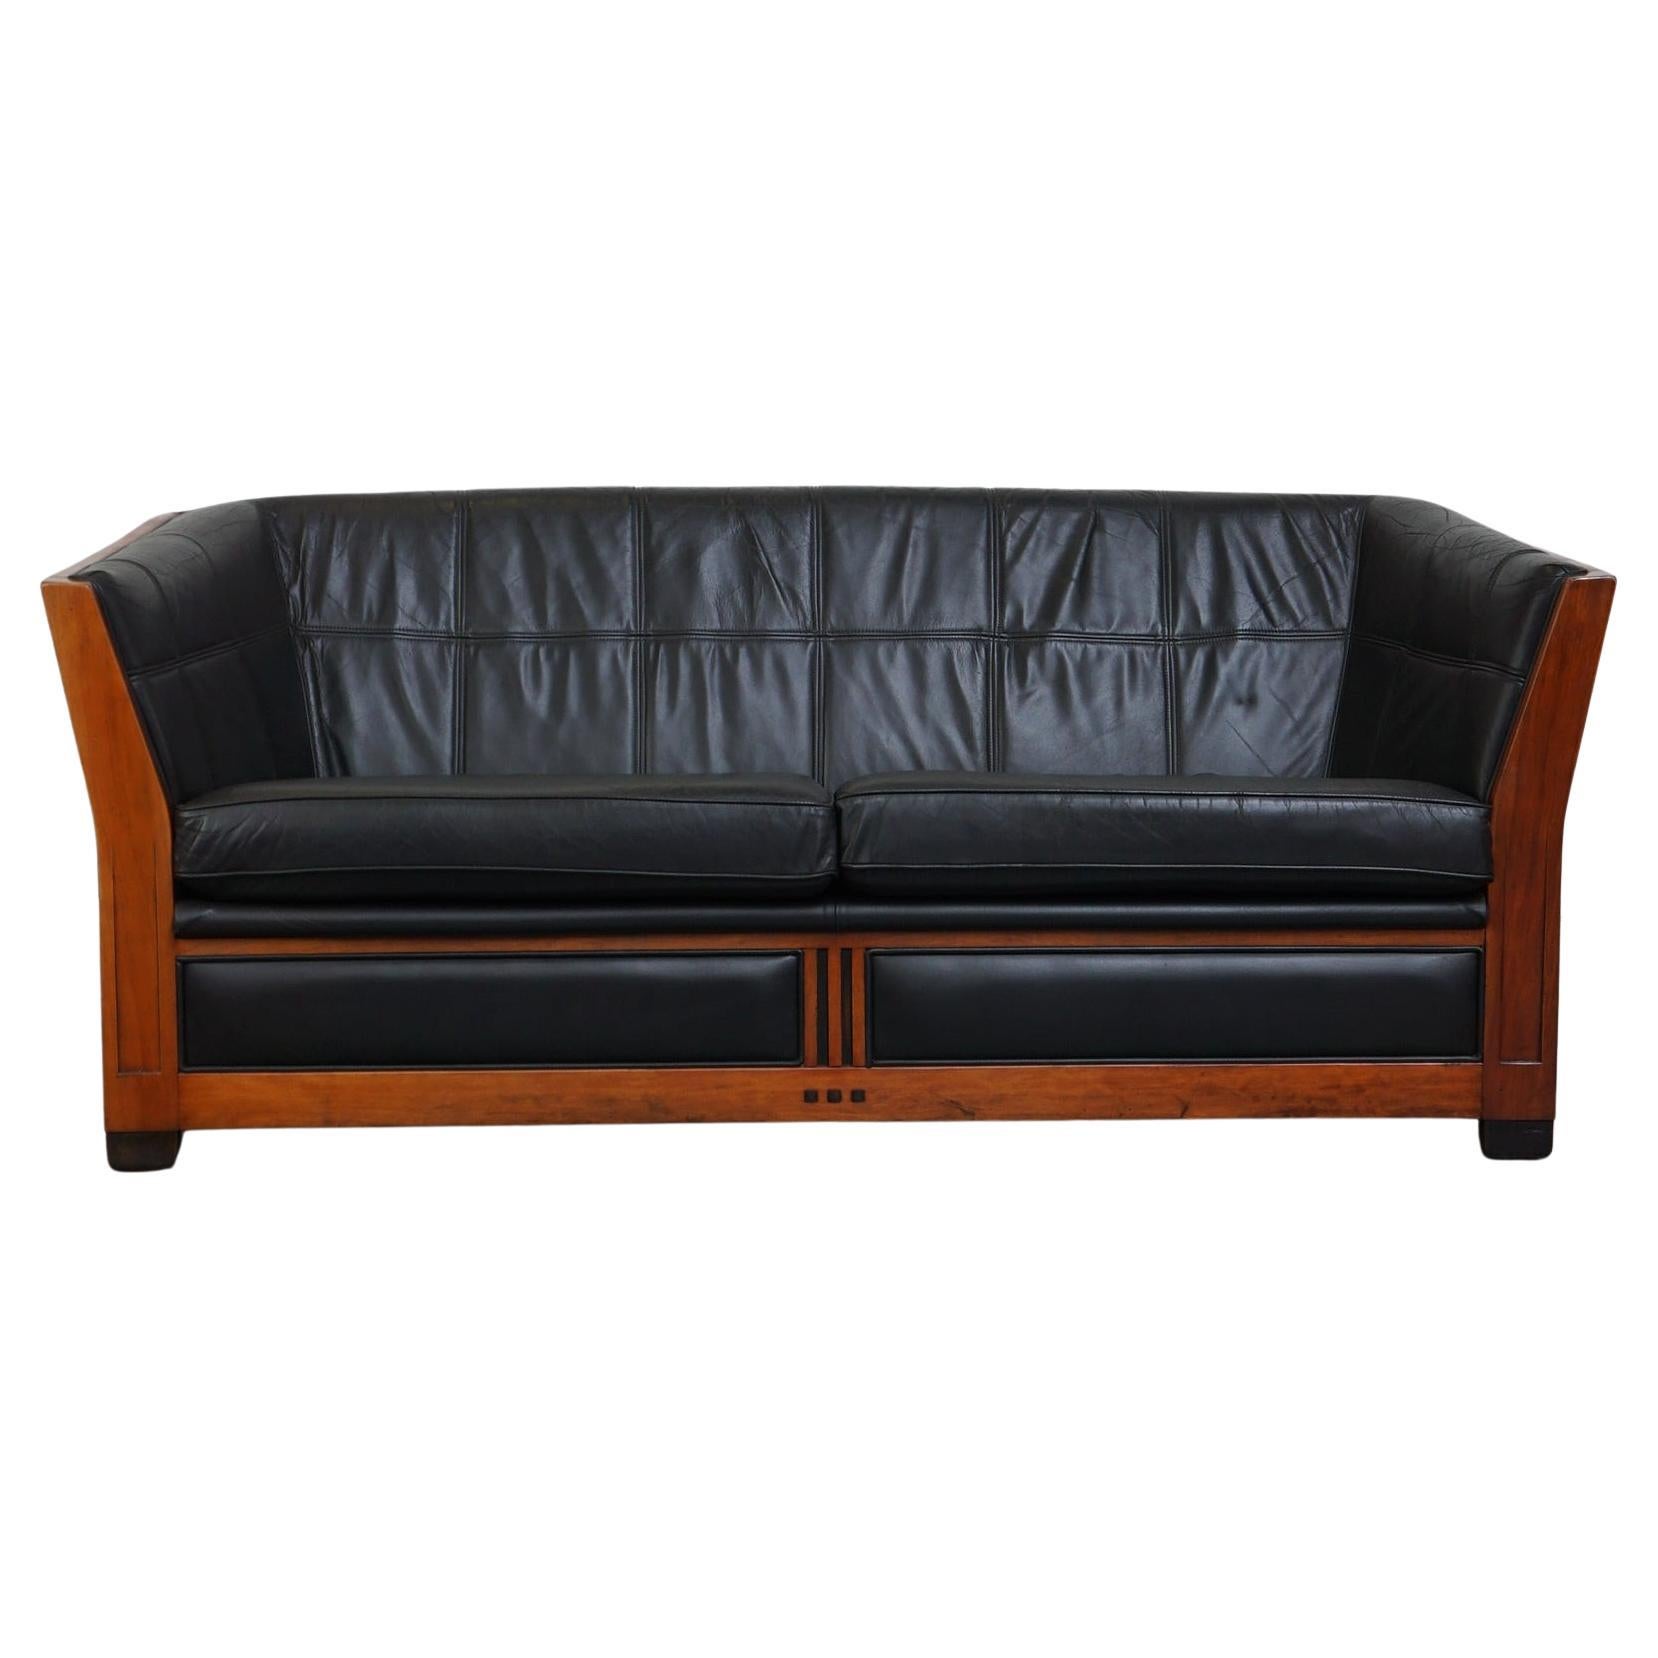 Unique black leather and wooden Art Deco design 2.5-seater sofa with a stunning 